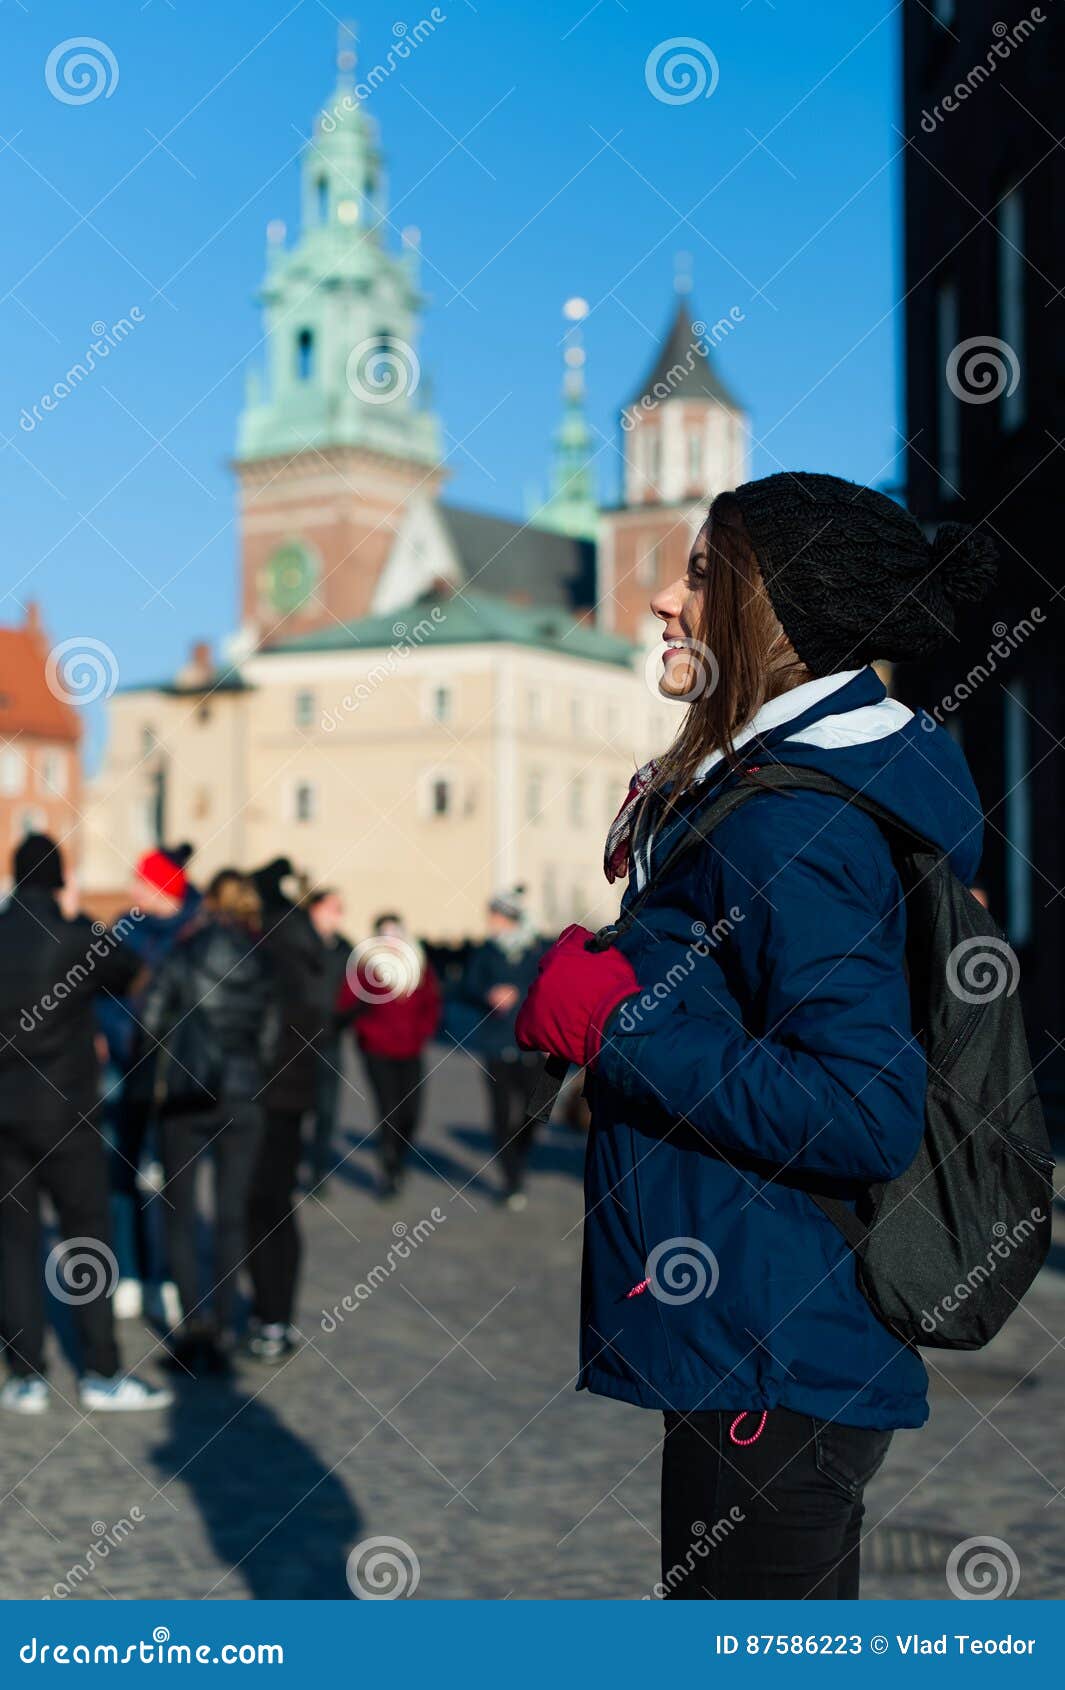 young woman tourist in the city of kracow